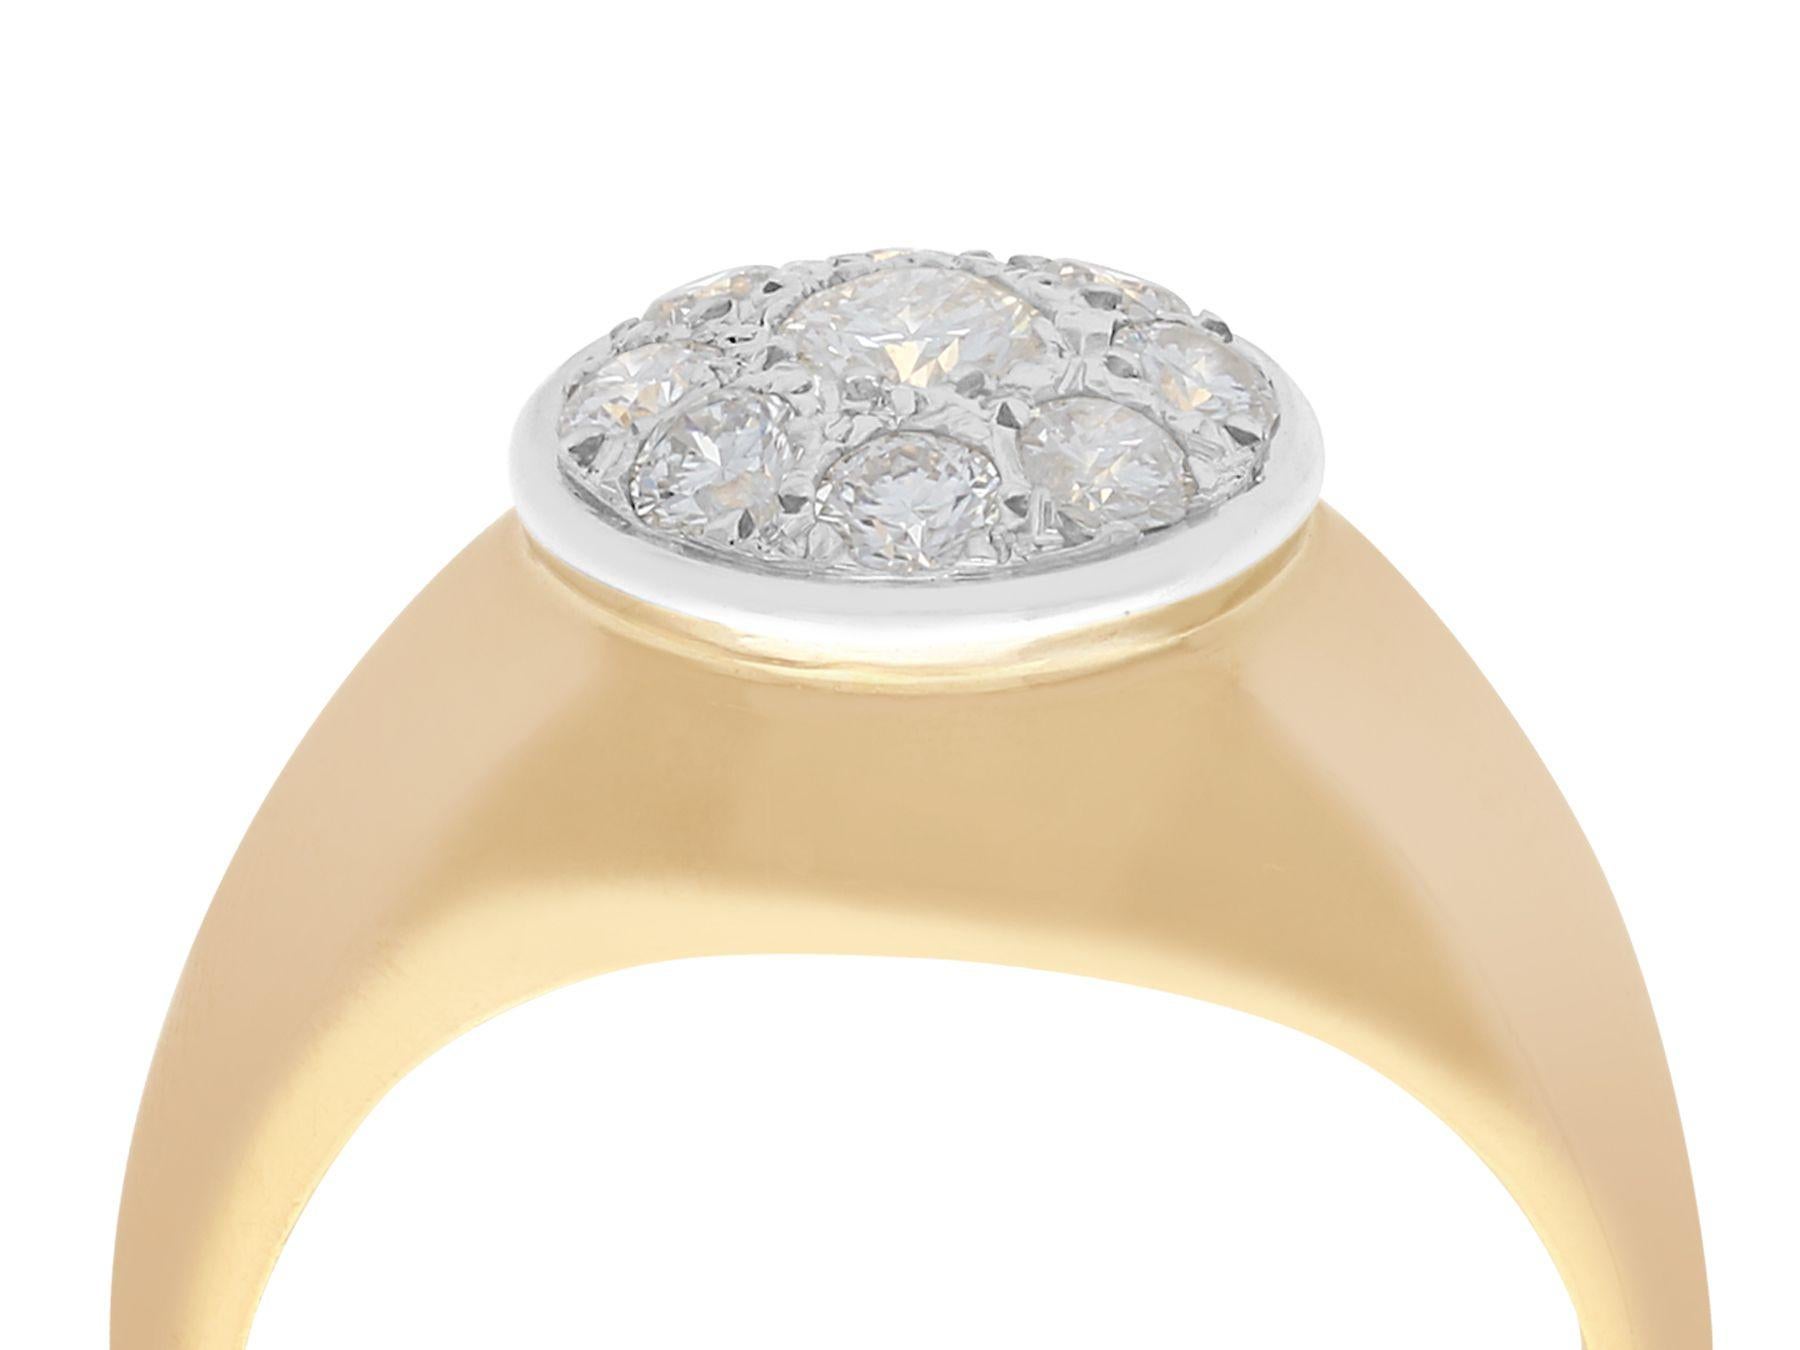 A fine and impressive 0.98 carat diamond, 18 karat yellow gold and 18 karat white gold cluster ring; part of our diverse vintage jewelry collections.

This fine and impressive diamond cluster ring has been crafted in 18k yellow gold with an 18k